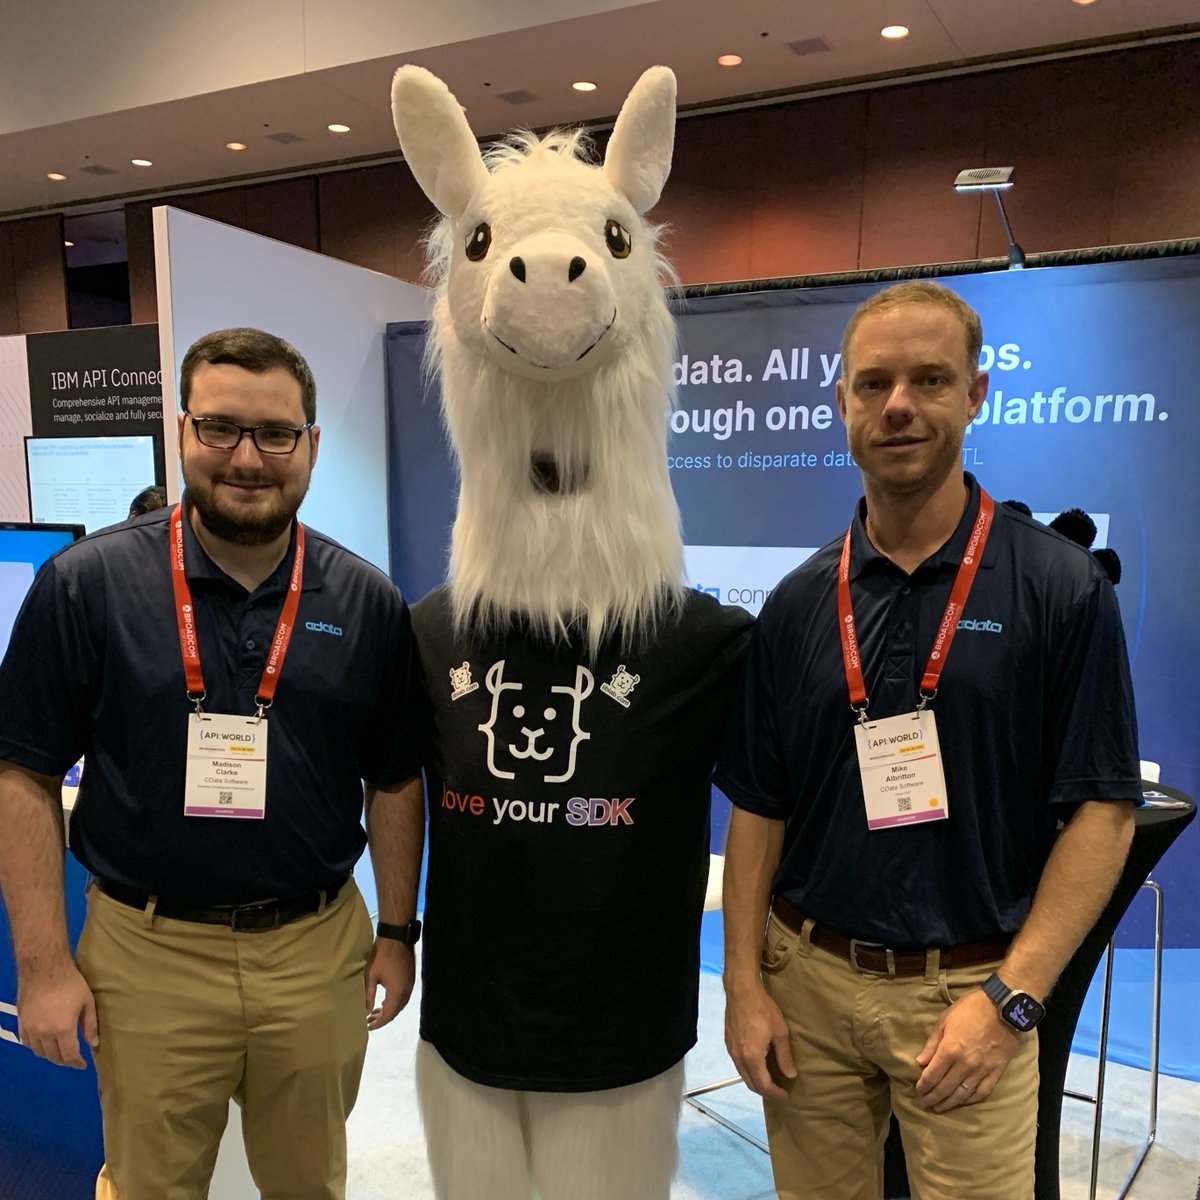 We're having a *llama* fun here at #APIWorld! Make sure to head to booth 216 to learn how CData can help connect any data across your stack.